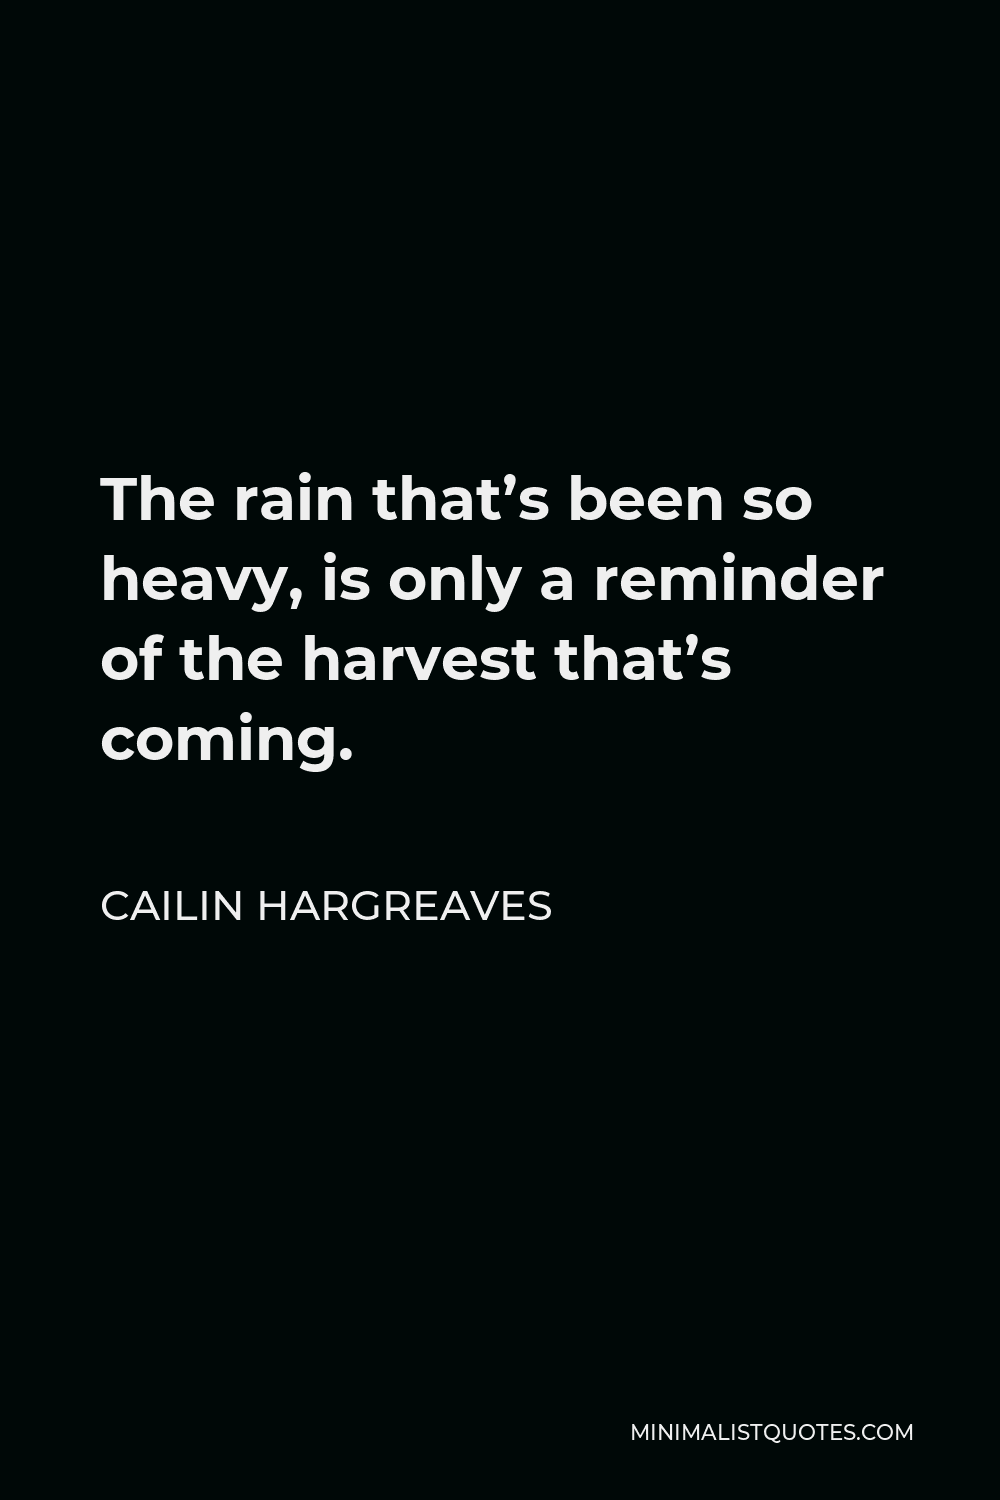 Cailin Hargreaves Quote - The rain that’s been so heavy, is only a reminder of the harvest that’s coming.